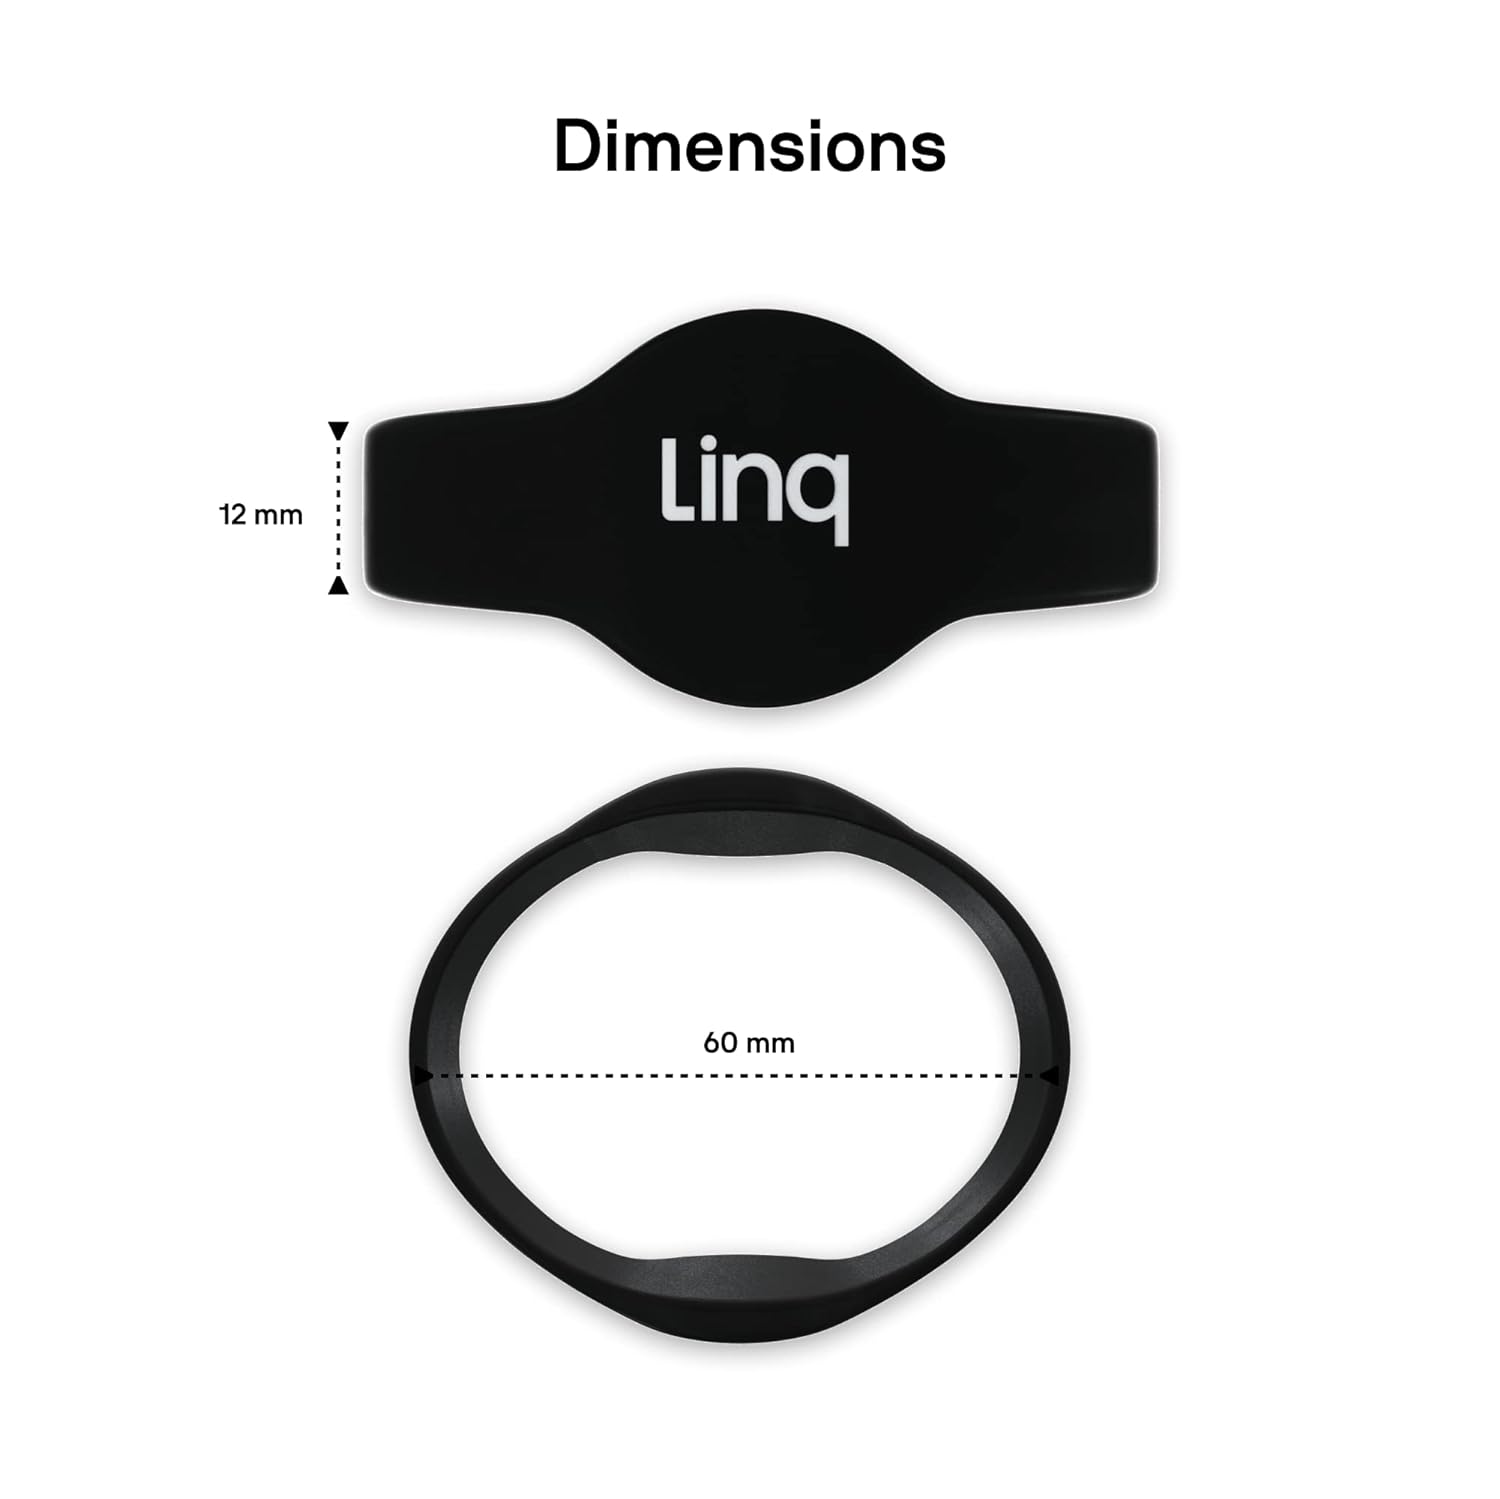 Linq Bracelet v3 - Smart NFC and QR Technology Band for Networking, Custom Links, Videos, and More (Black)